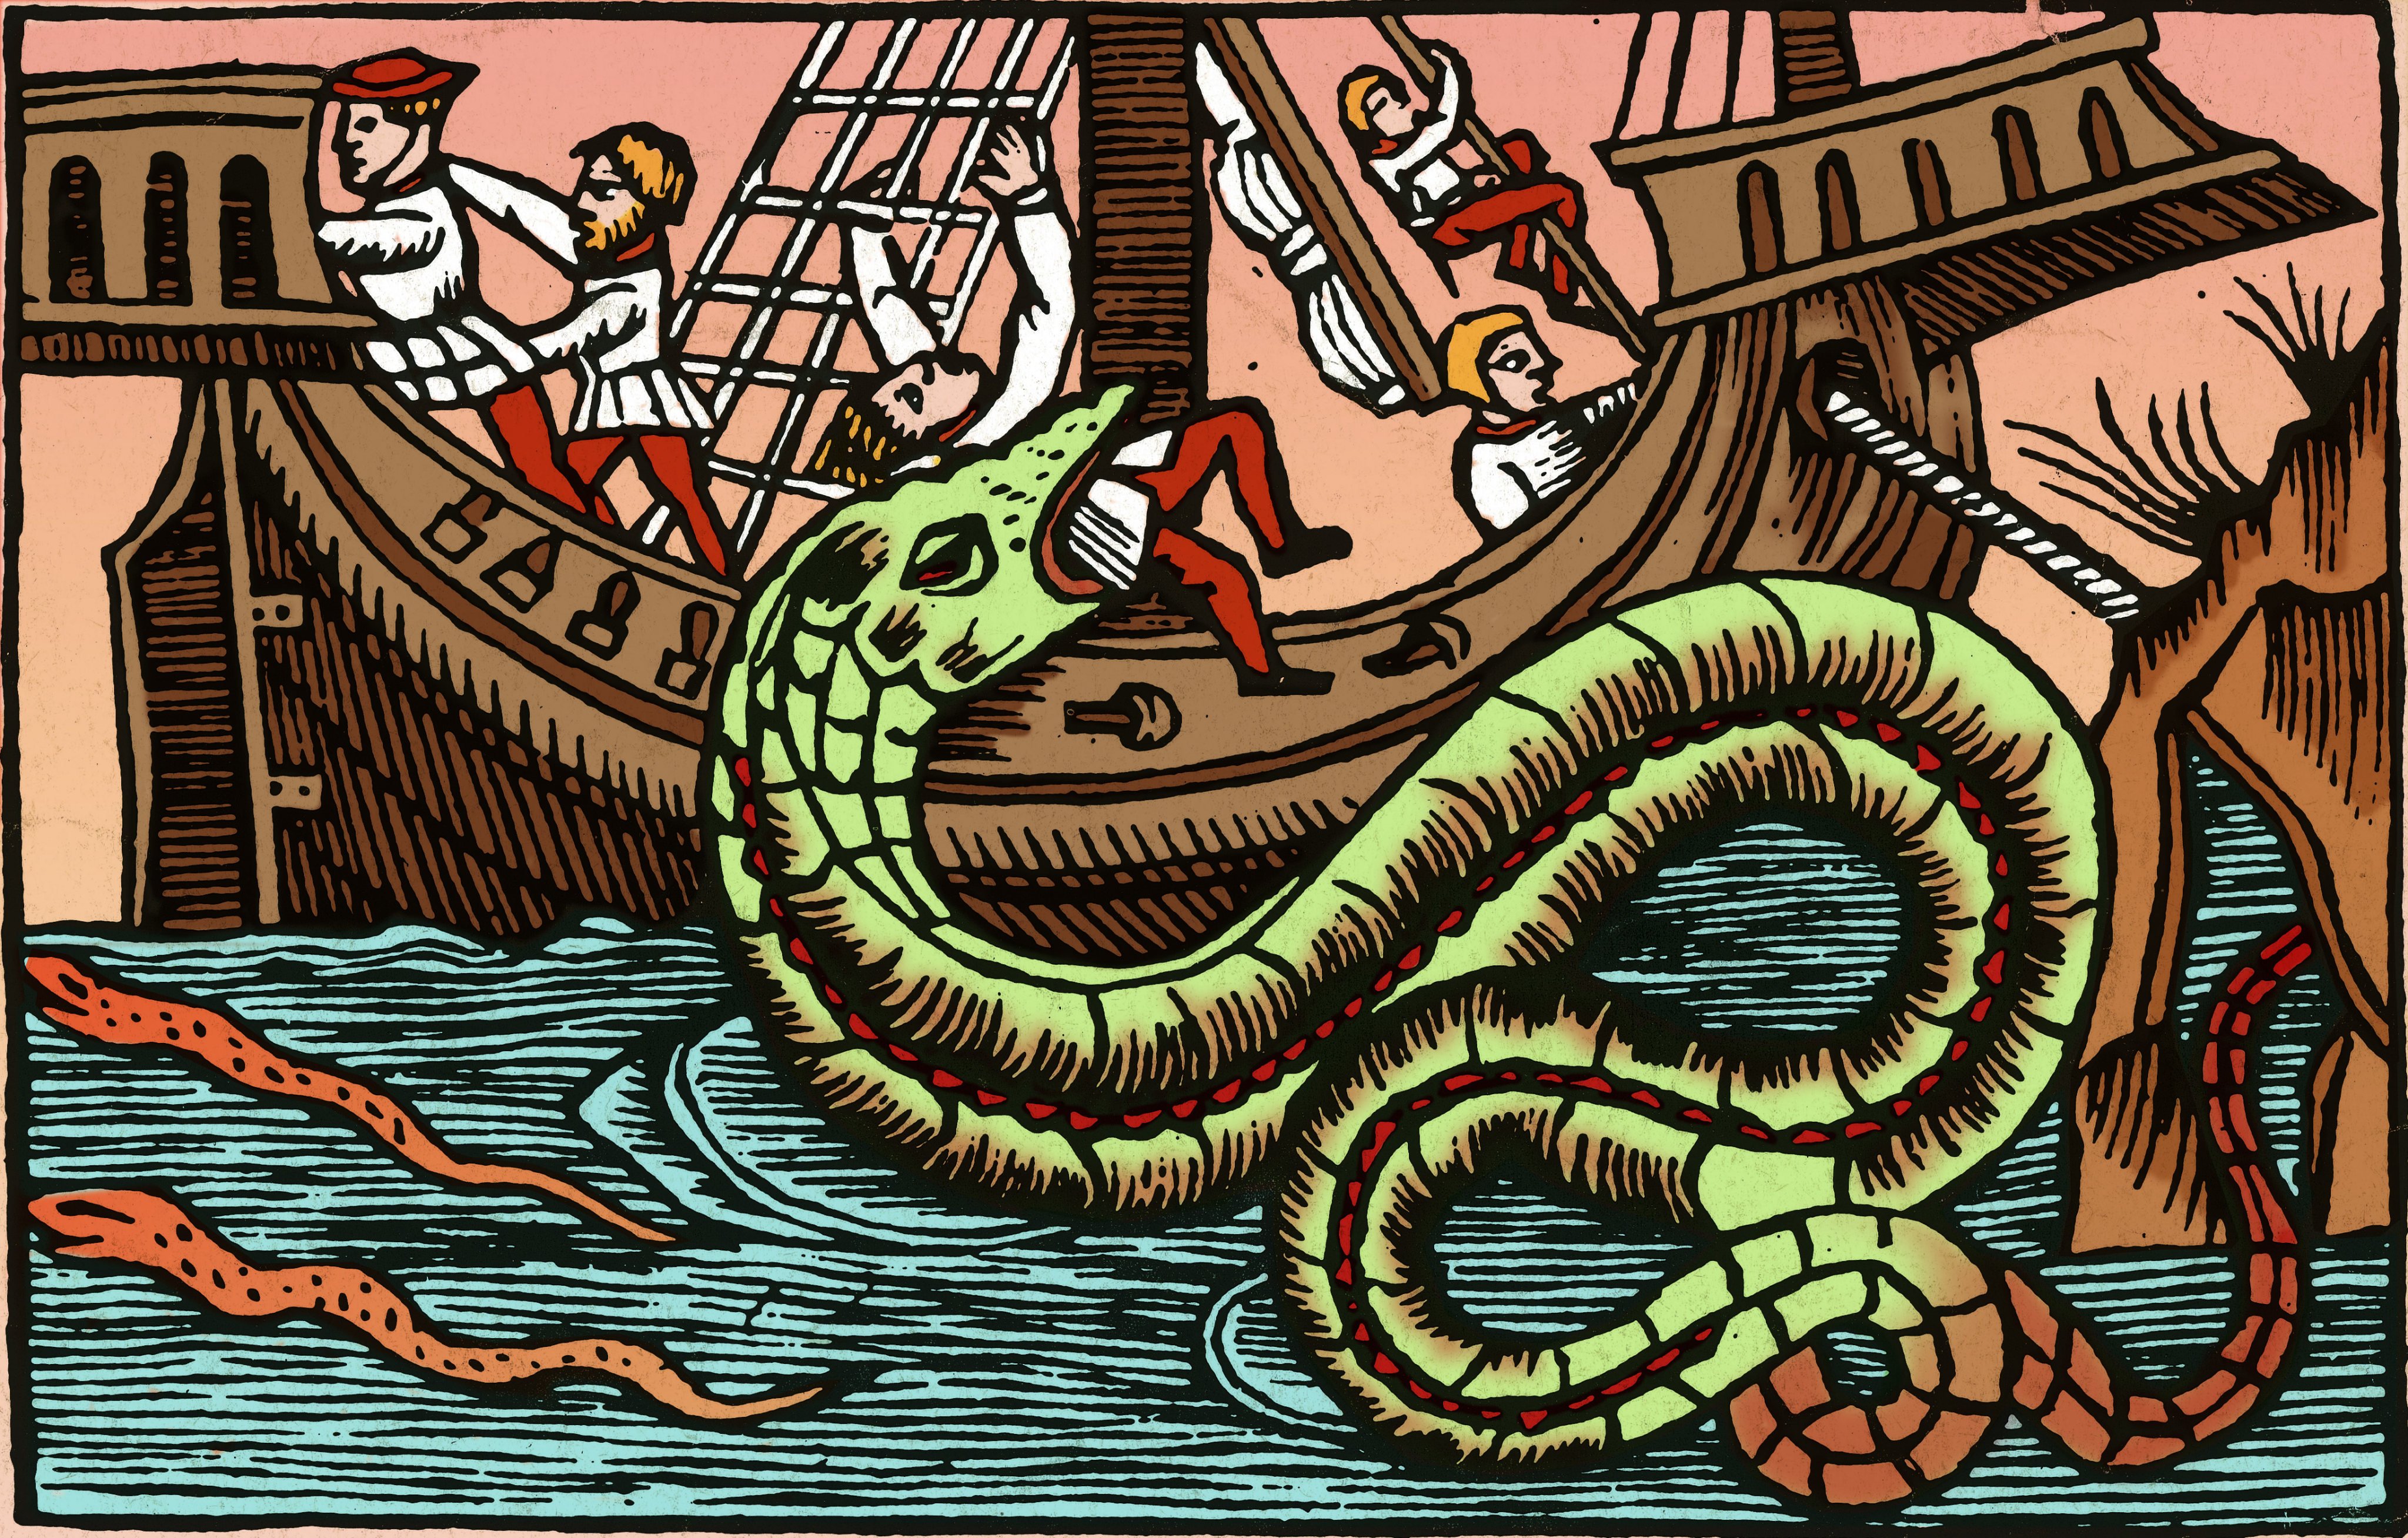 Around August 2022, names of Greek mythological creatures were adopted for Covid-19 variants for clearer (and catchier) identification. Kraken received particular attention, but was critiqued for excessively fearful connotations. A system using astronomical names has since been used. Photo: Getty Images